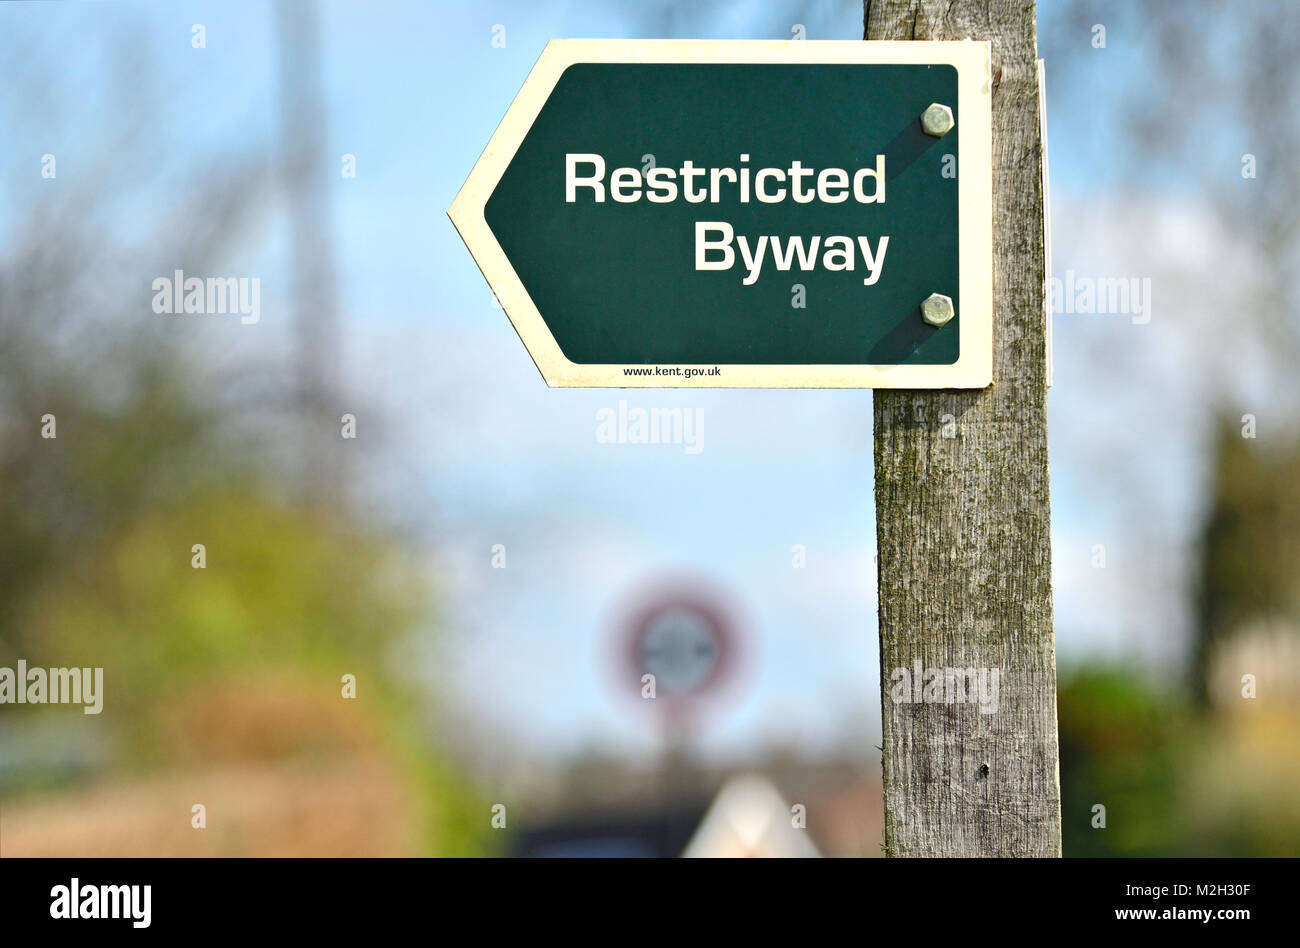 Boughton Monchelsea village, Kent, England. Restricted Byway sign Stock Photo